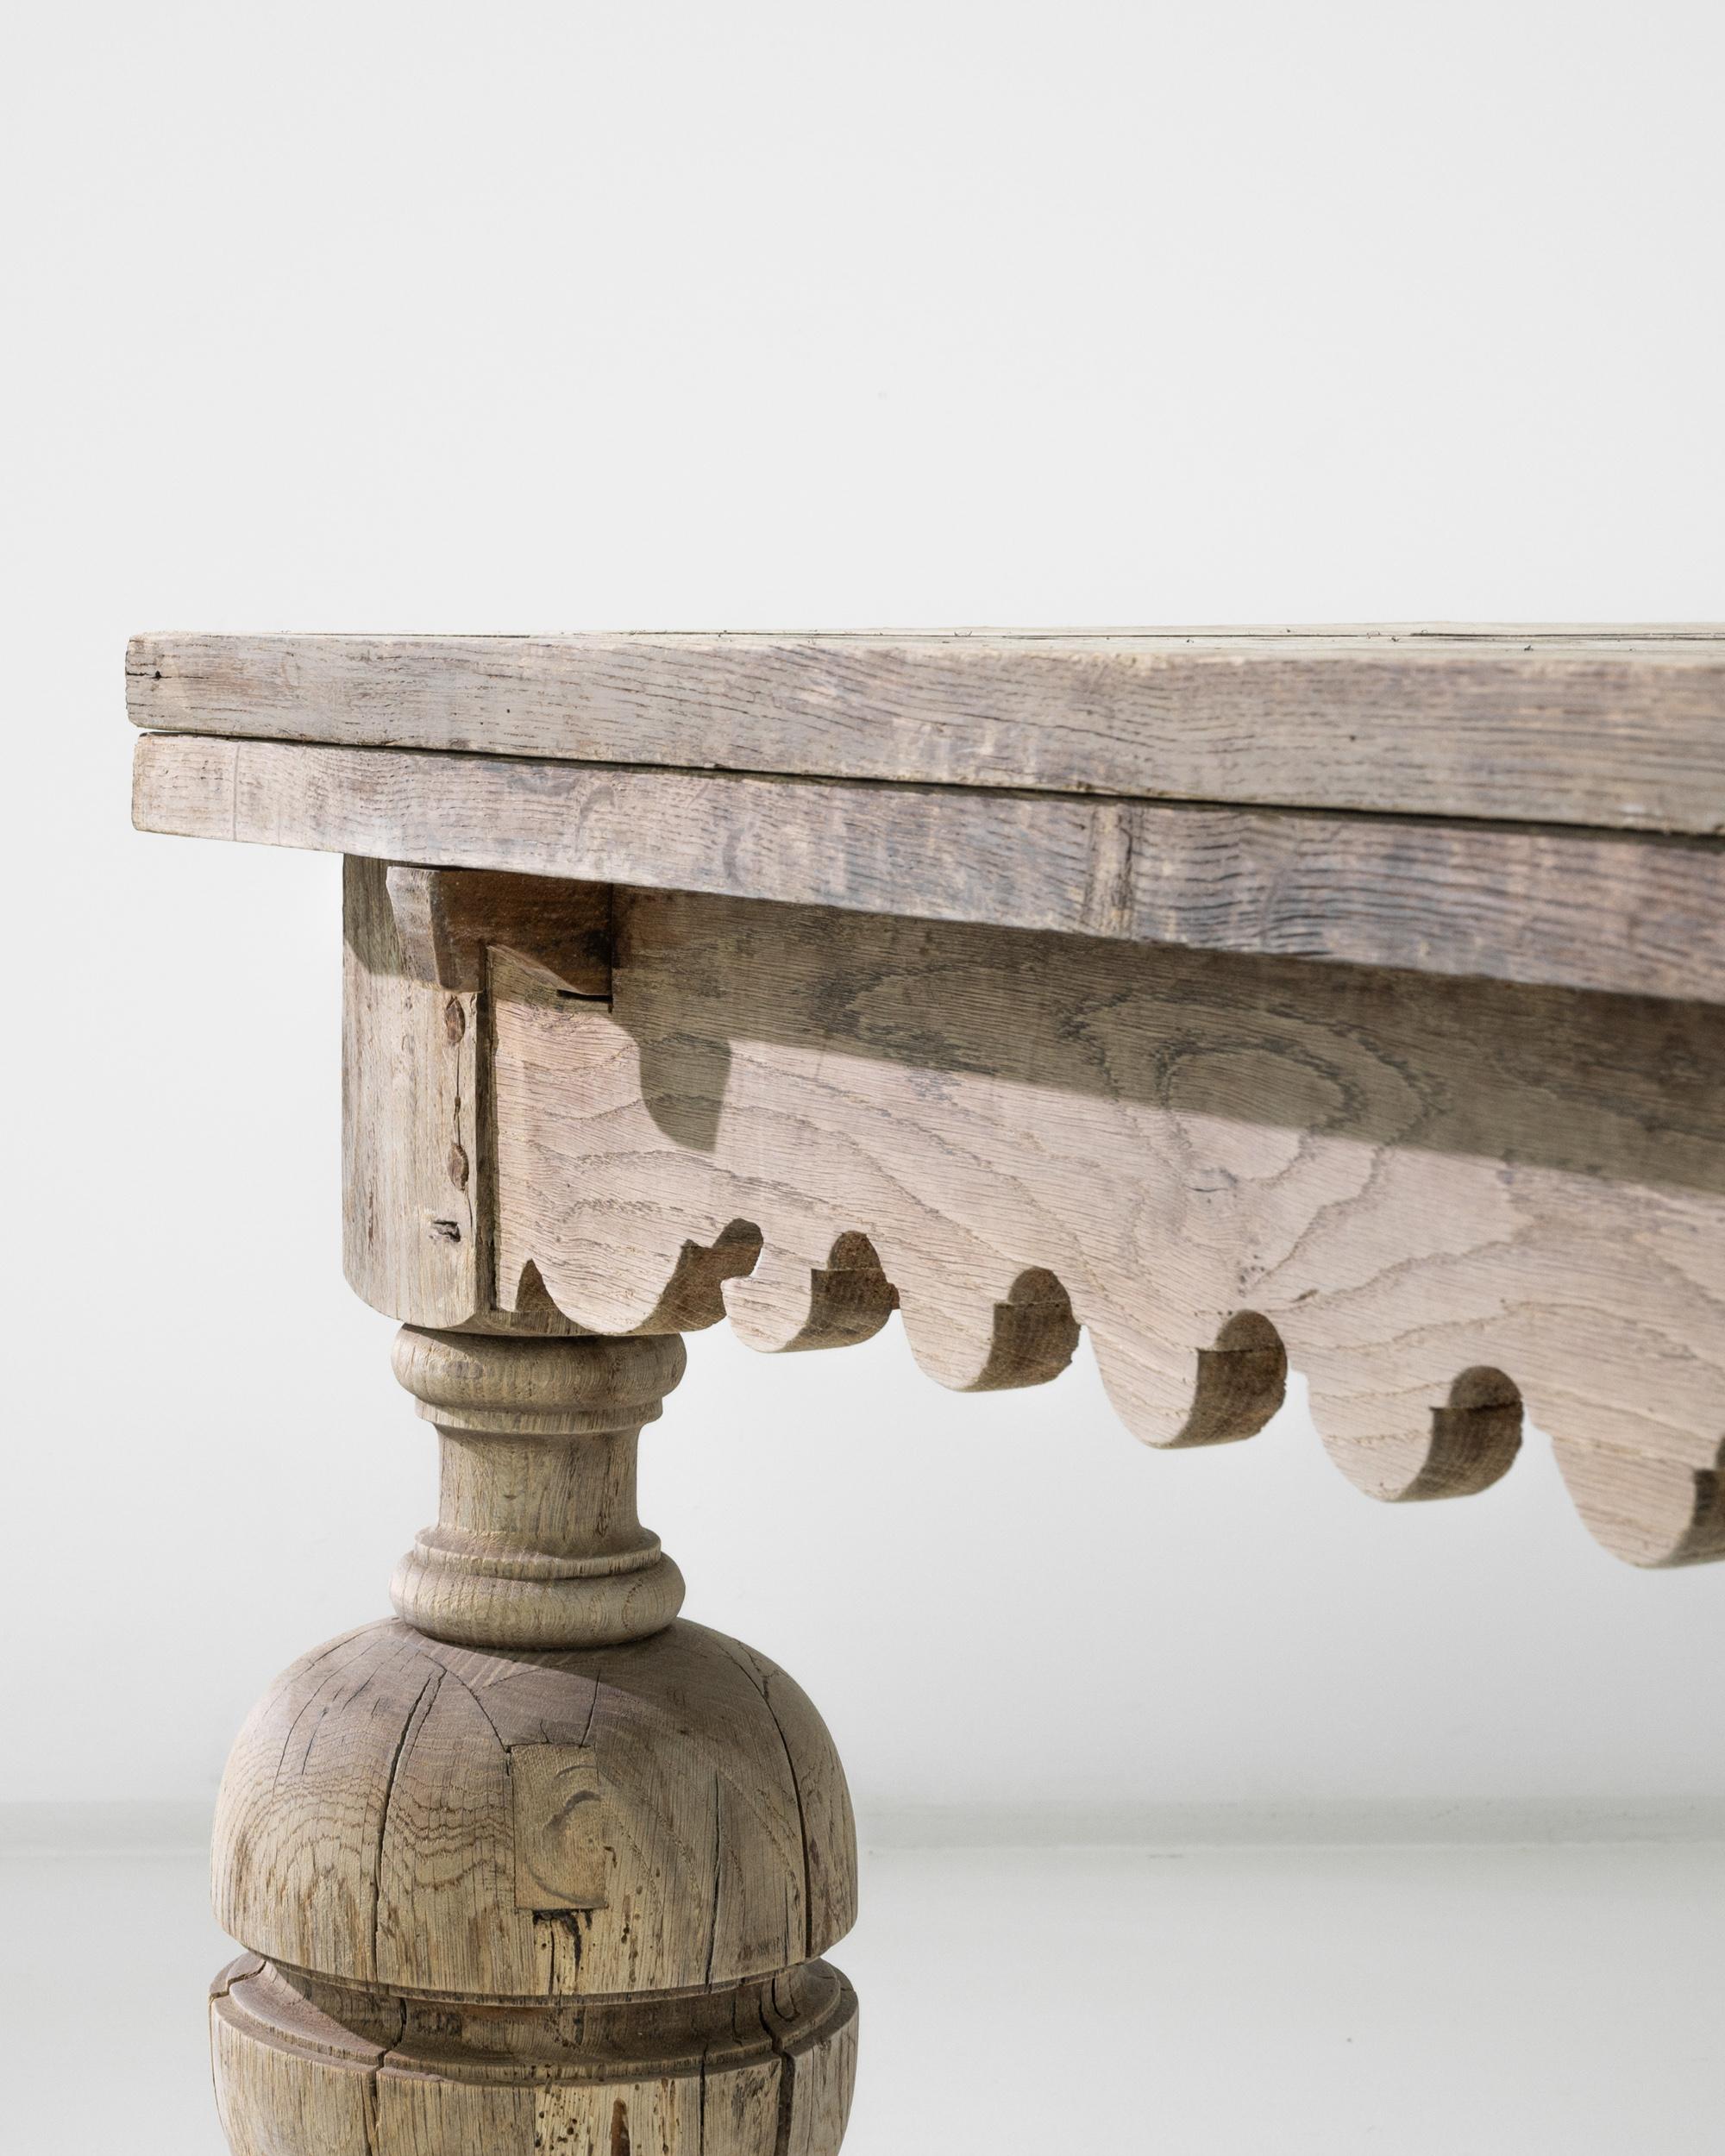 A twentieth-century bleached oak dining table with expandable leaves. This large dining table is full of character, featuring a sawtooth-patterned skirt, bulbous lathed legs, and an expertly applied new bleached finish. With its leaves outstretched,